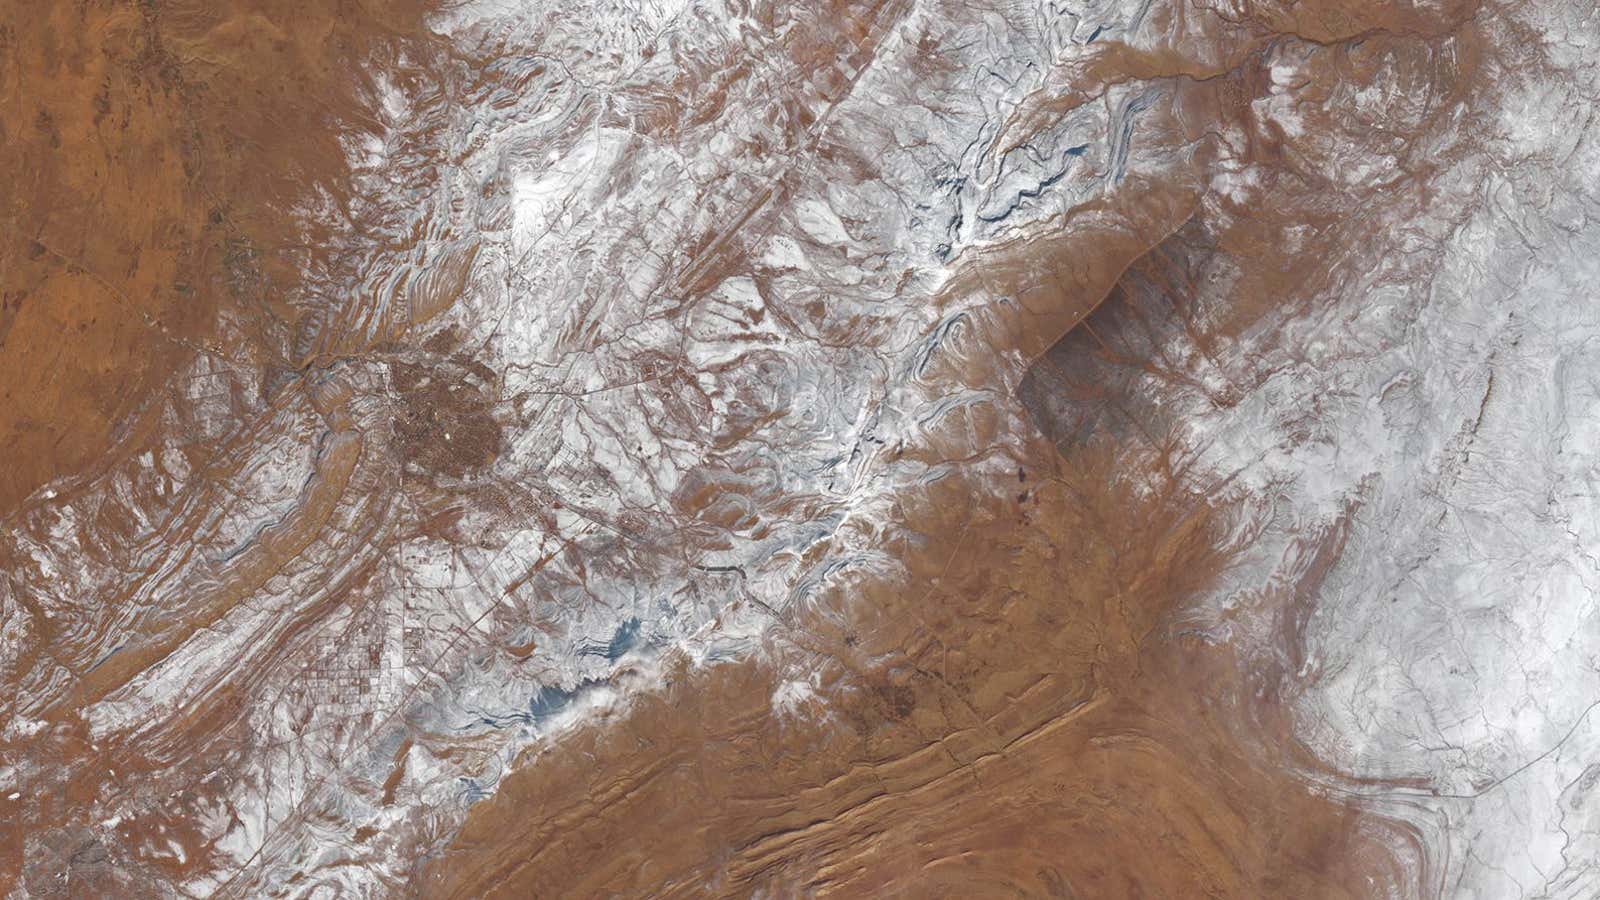 This Landsat image shows snow rising with the local elevation near Aïn Séfra in the Sahara desert.